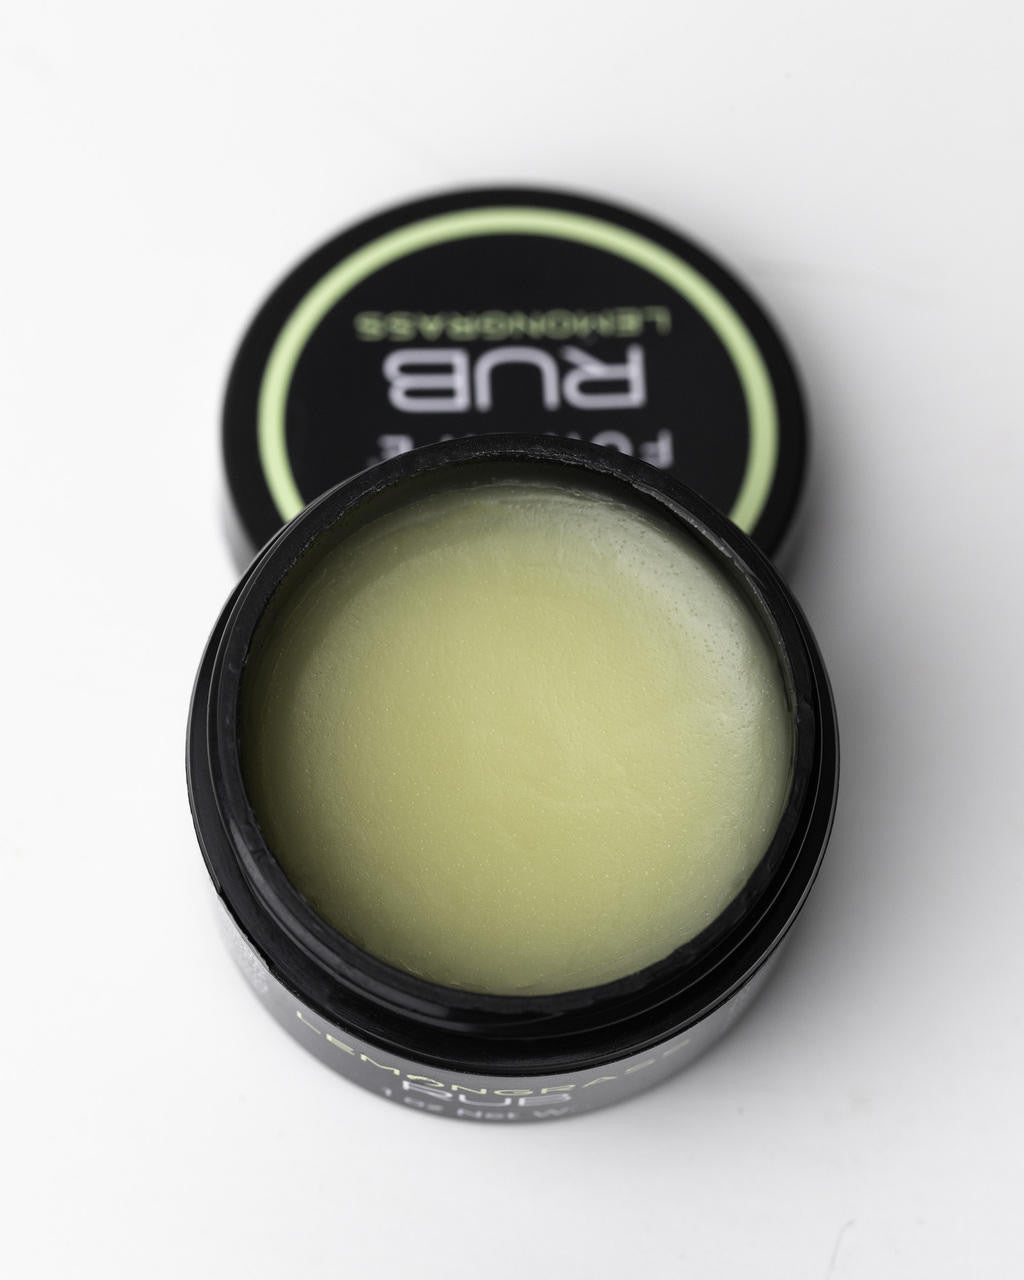 Unlike cbd gummies, cbd topicals tend to target CB2 receptors in the skin cells. Using a cbd oil topical application can be the best cbd product in your arsenal. Buy our cbd rub now.